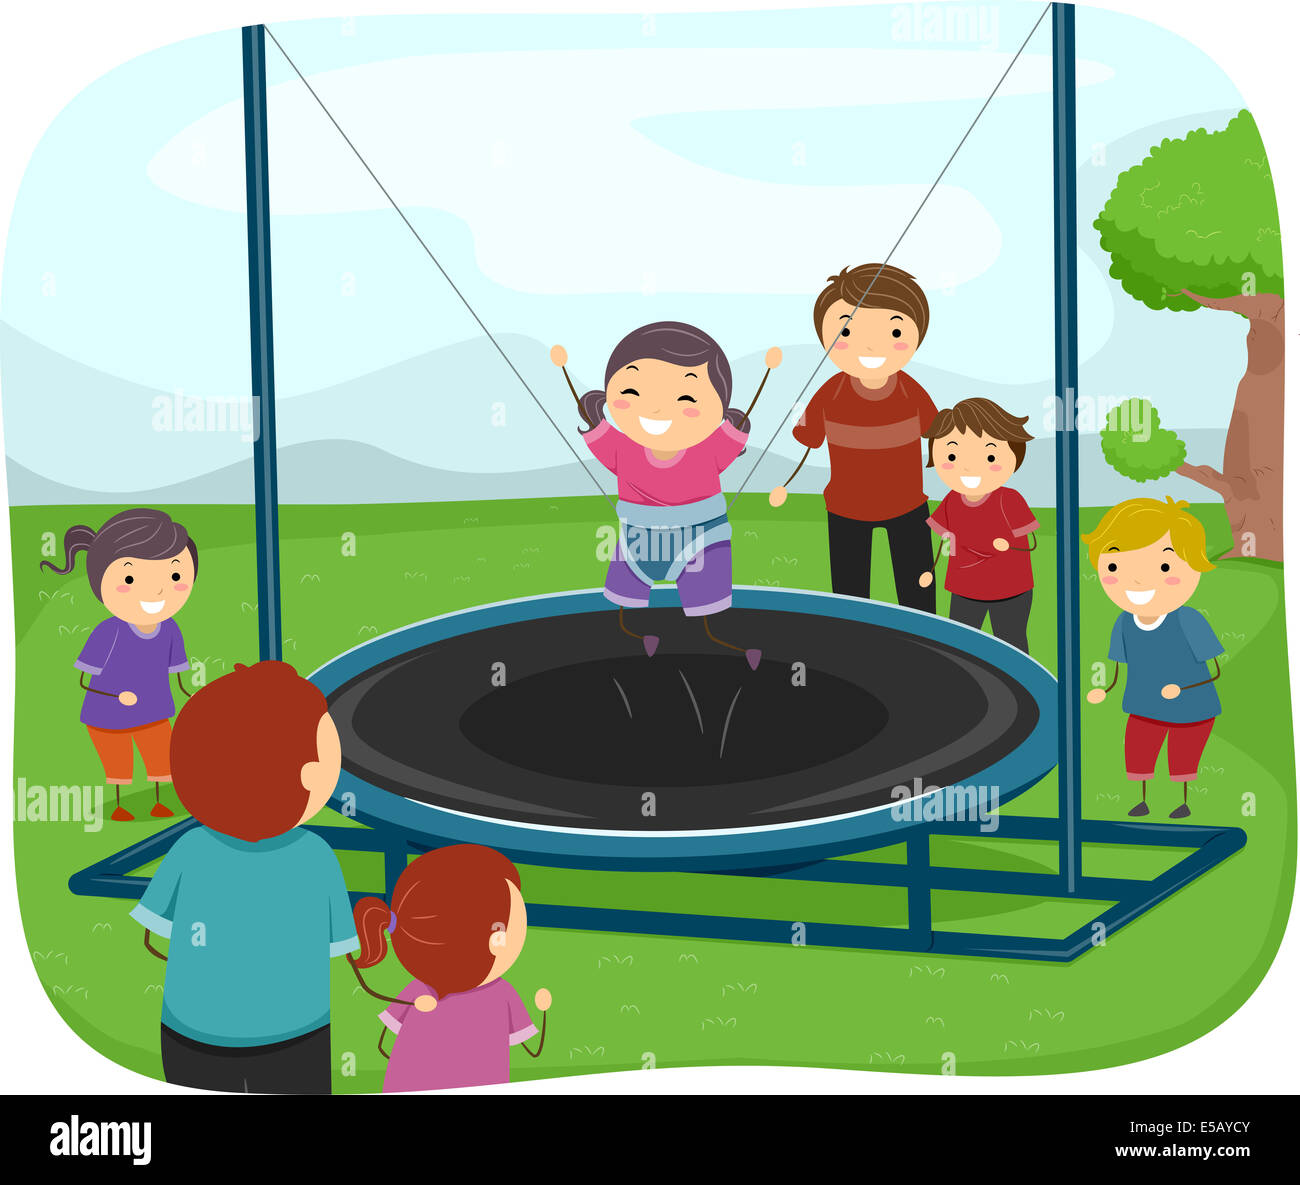 Illustration of Kids Playing with a Trampoline Stock Photo - Alamy